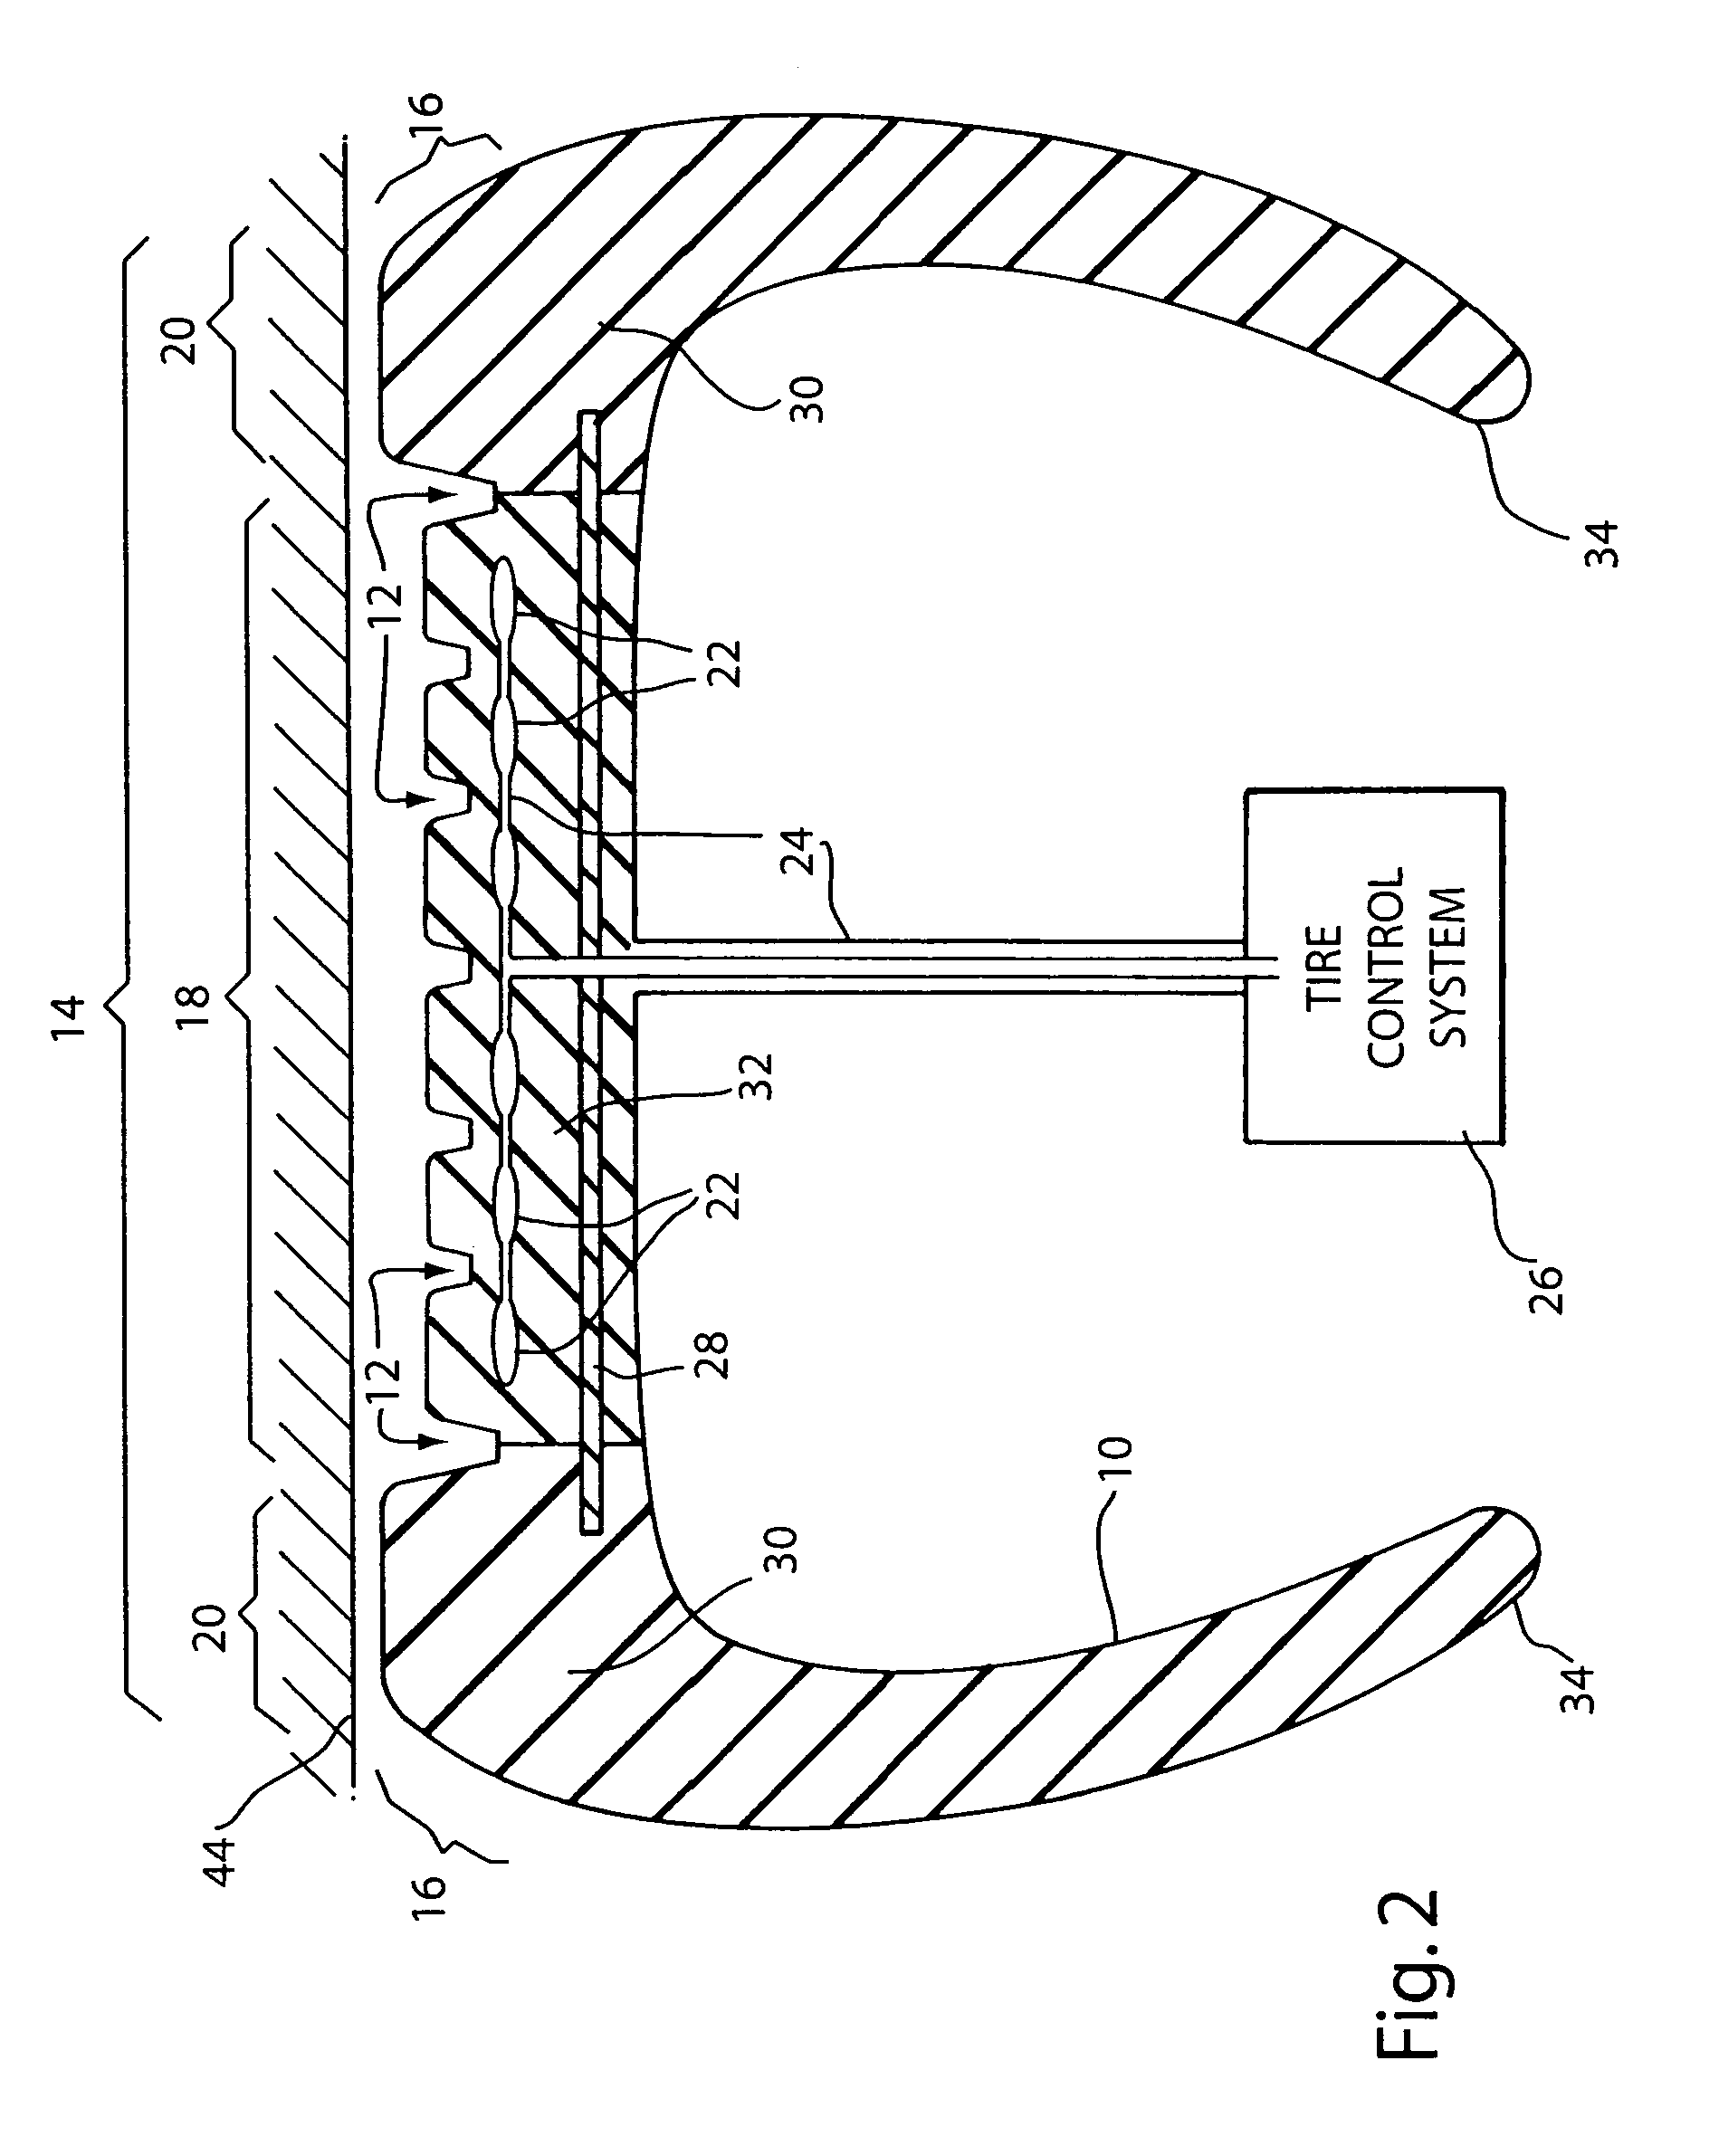 Fuel efficient vehicle tire having a variable footprint and low rolling resistance